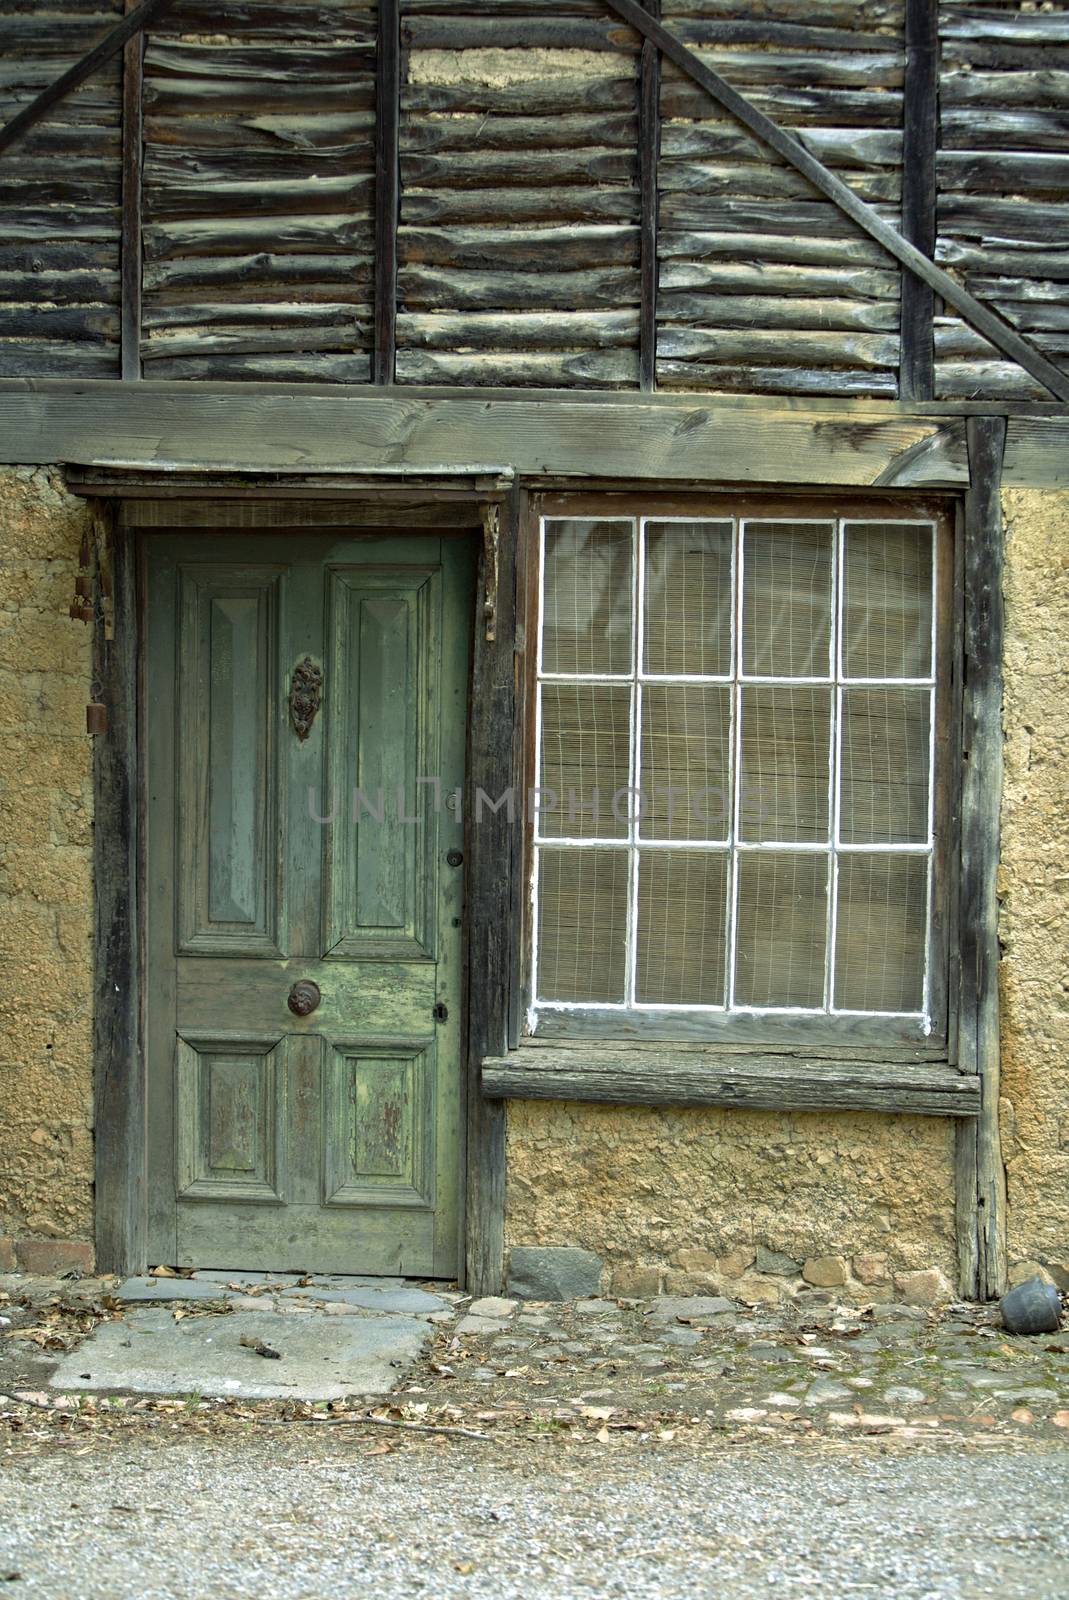 Weathered Green Door With an Aged Stone House, Home Related